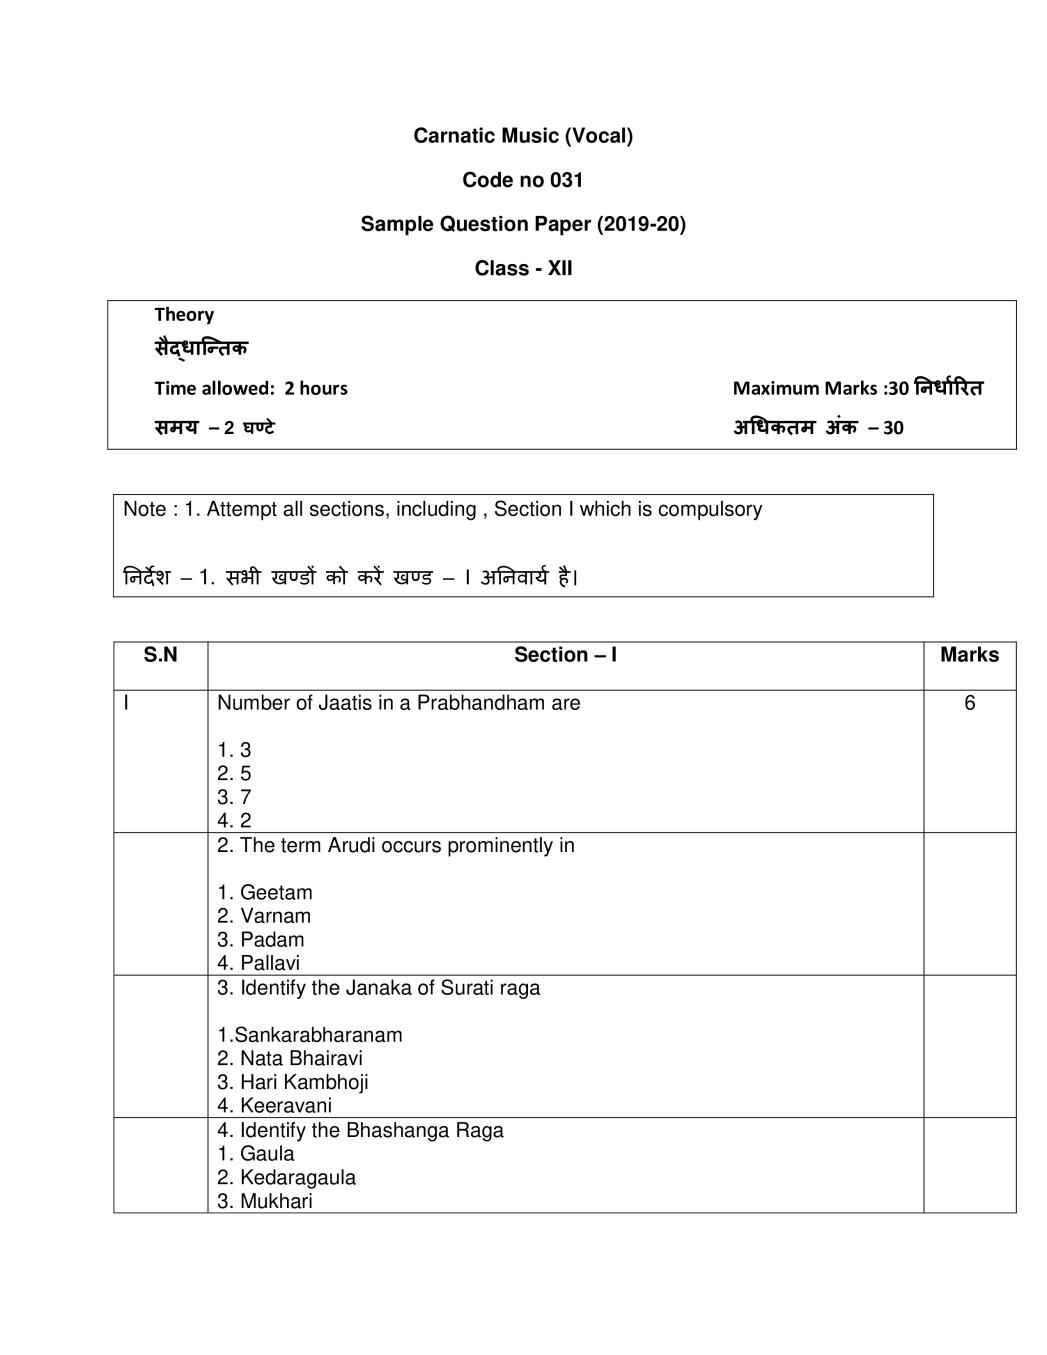 CBSE Class 12 Sample Paper 2020 for Carnatic Music (Vocal) - Page 1